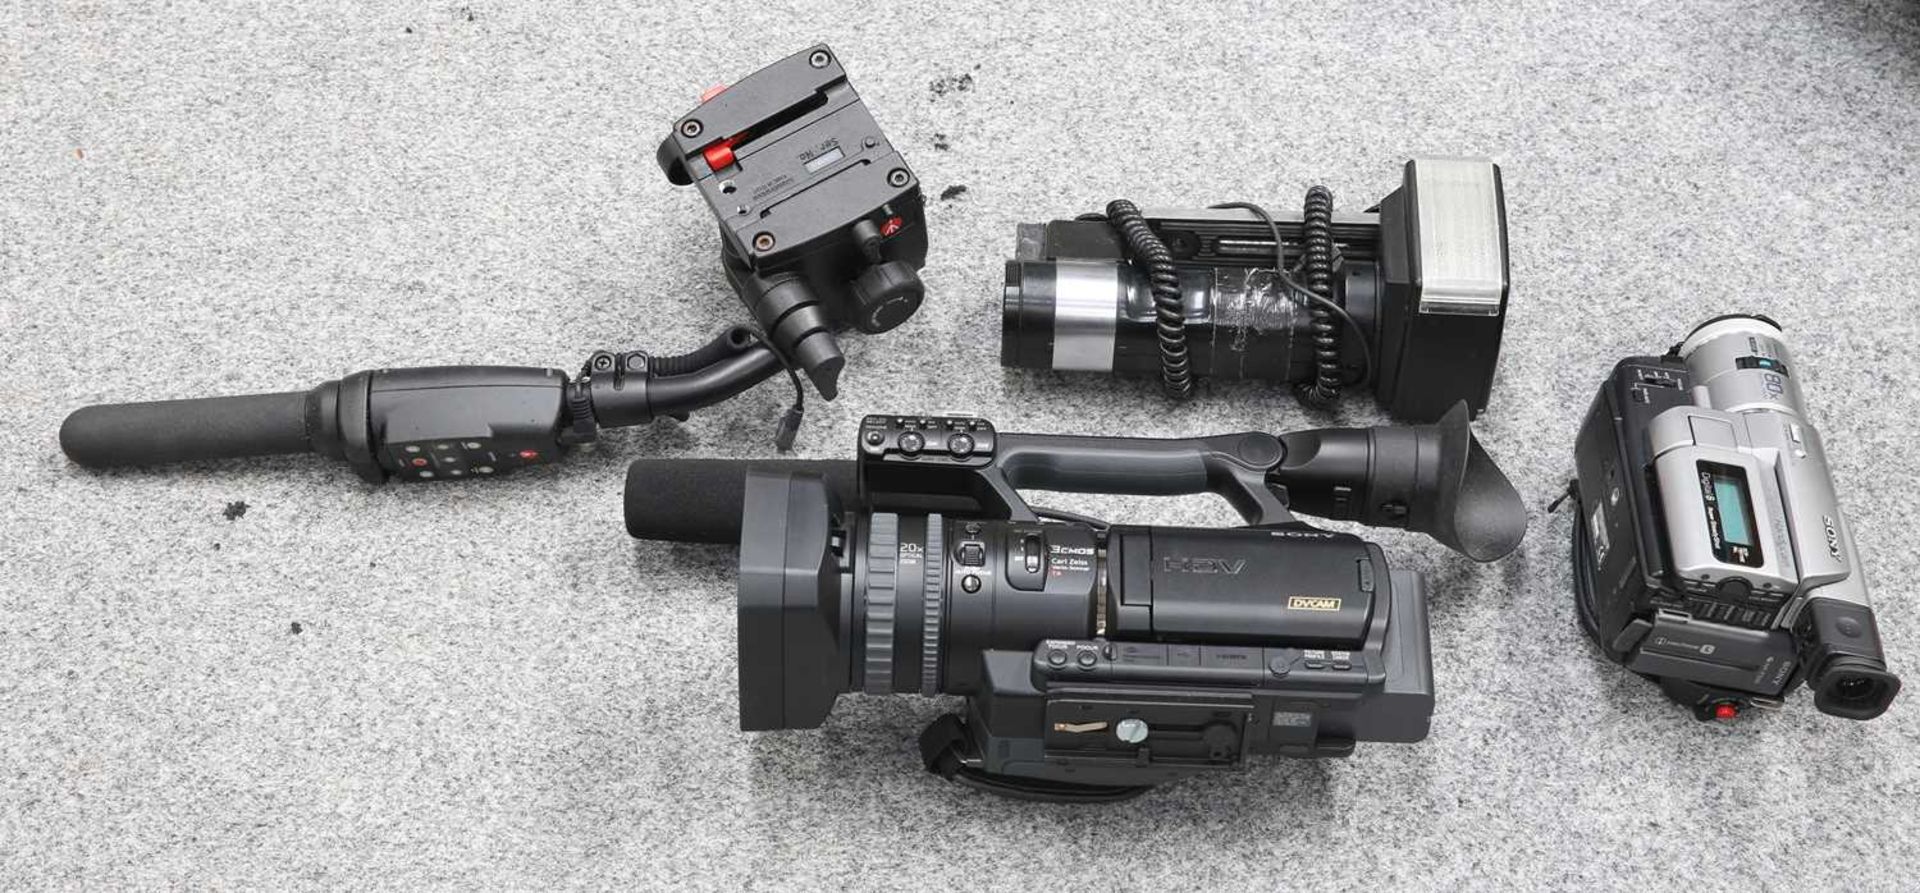 A SONY HDV 1080i MINI DV CAMCORDER AND OTHER CAMCORDER EQUIPMENT - Image 2 of 2